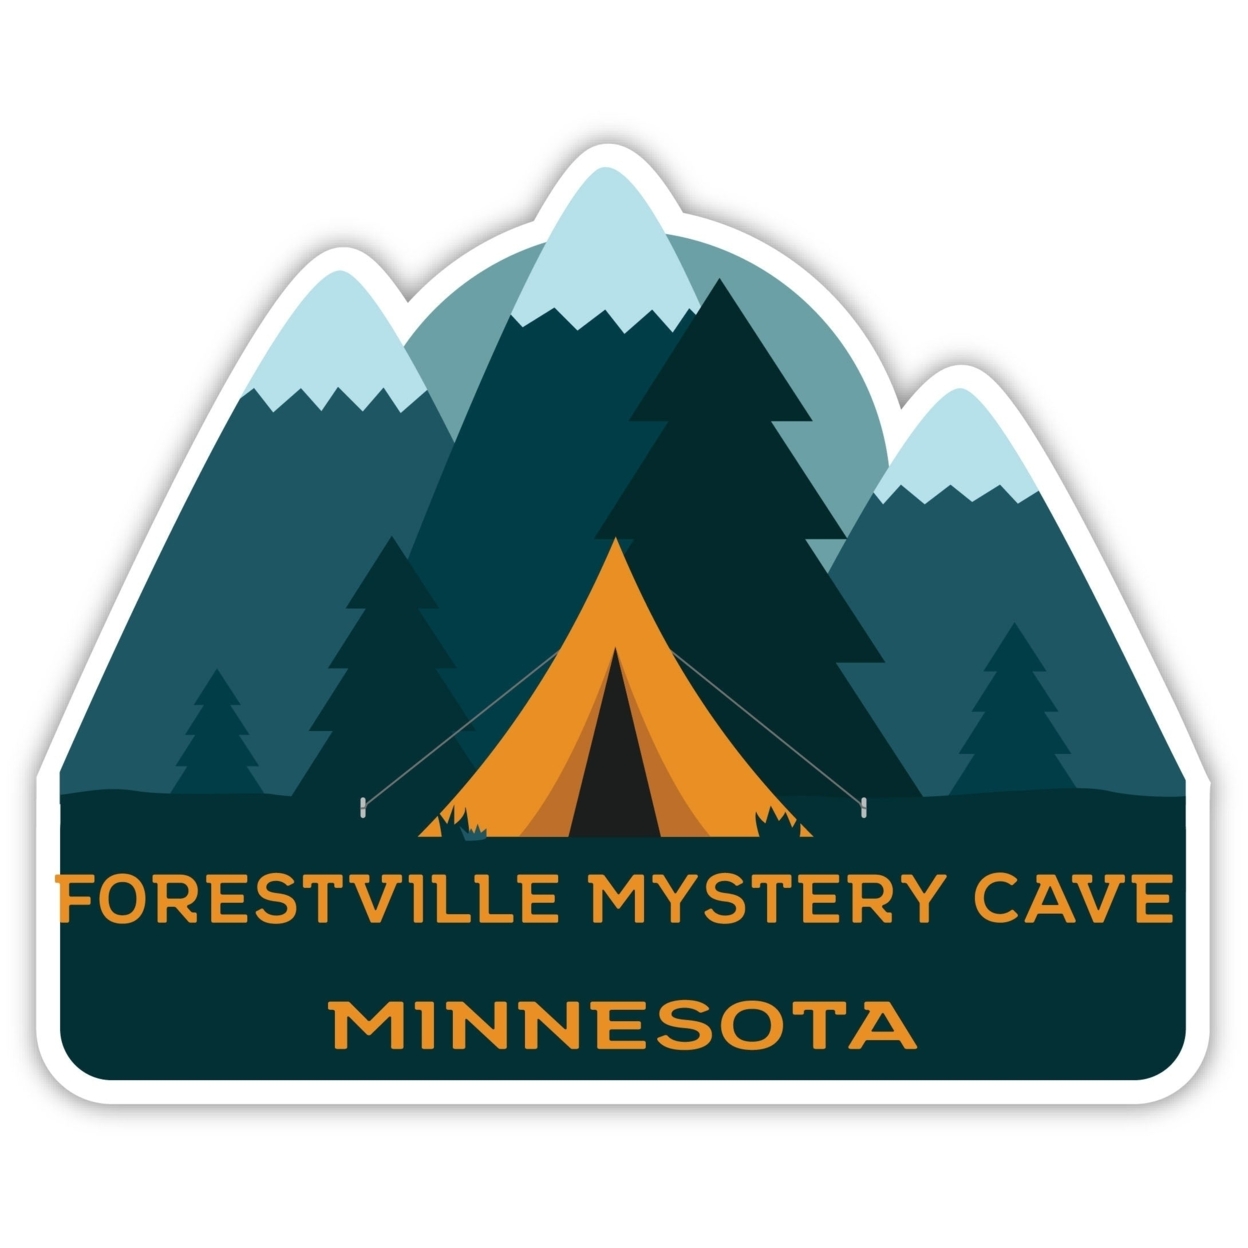 Forestville Mystery Cave Minnesota Souvenir Decorative Stickers (Choose Theme And Size) - 4-Pack, 10-Inch, Tent